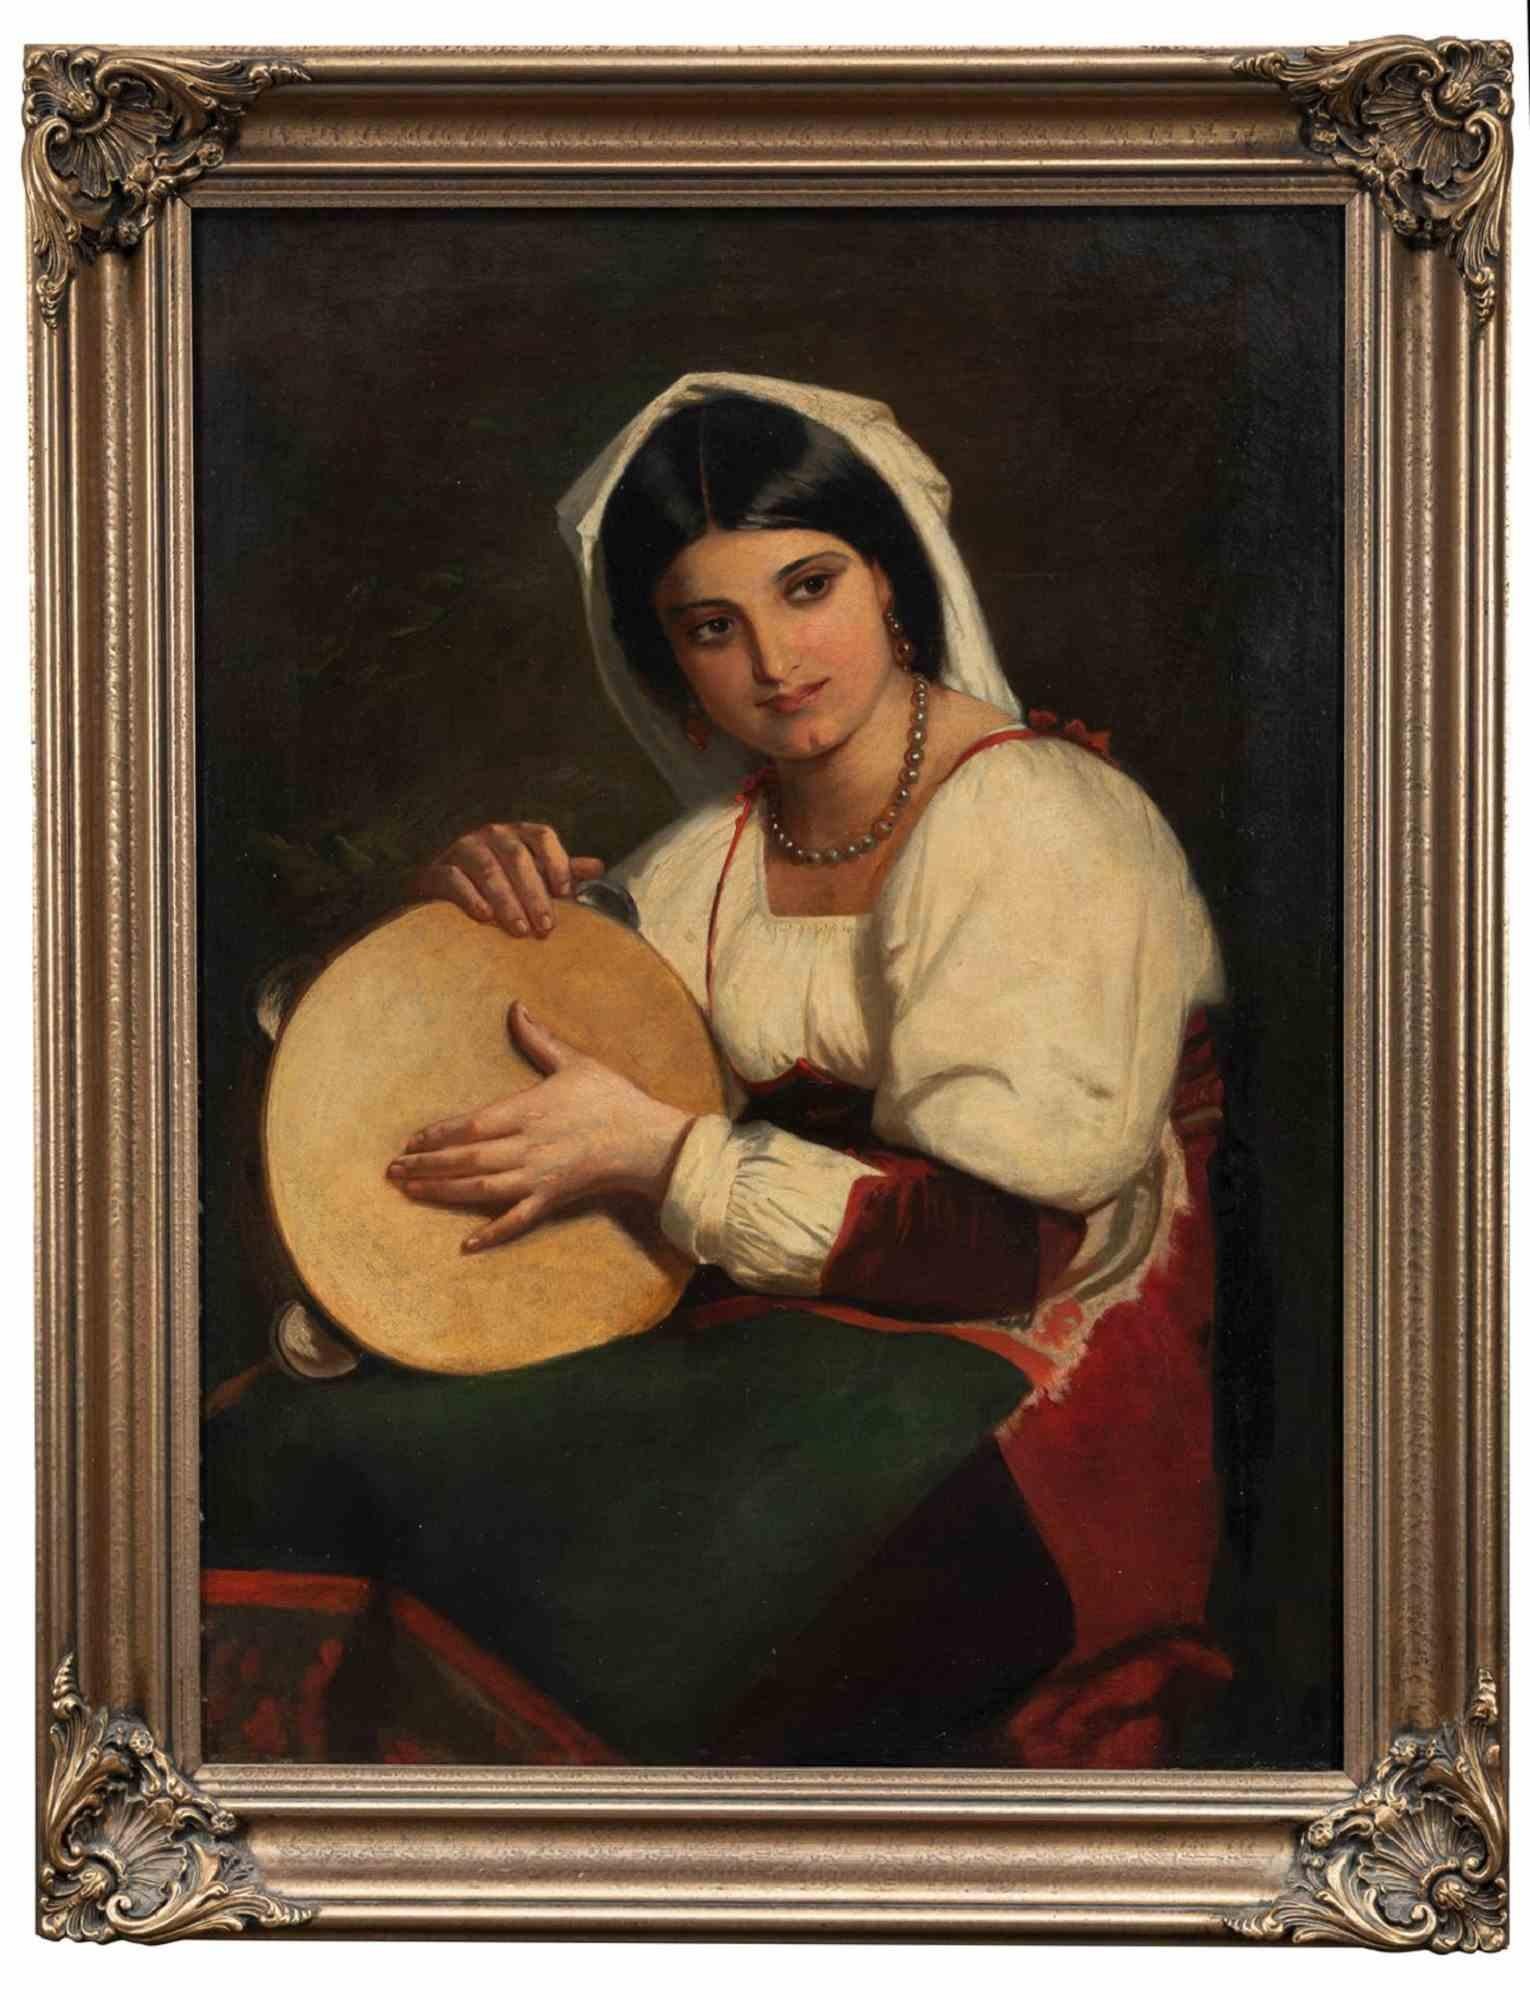 Unknown Figurative Art - Italian Girl with a Tambourine - Drawing  - 1900s